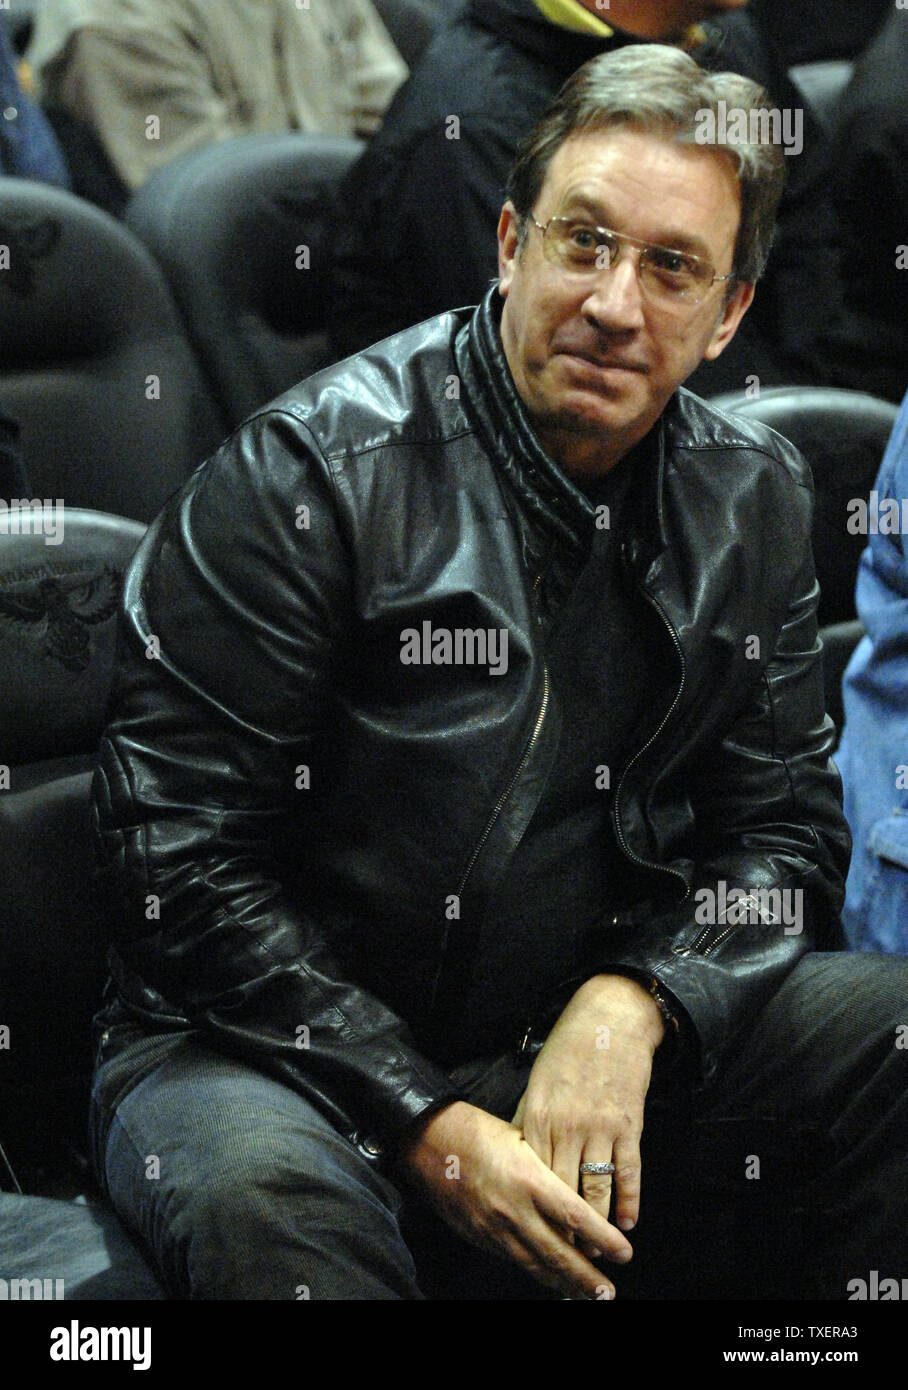 Actor Tim Allen, star of the forthcoming film "Wild Hogs" watches Atlanta Hawks play the visiting Los Angeles Lakers in the first half at Philips Arena in Atlanta, February 5, 2007. (UPI Photo/John Dickerson) Stock Photo